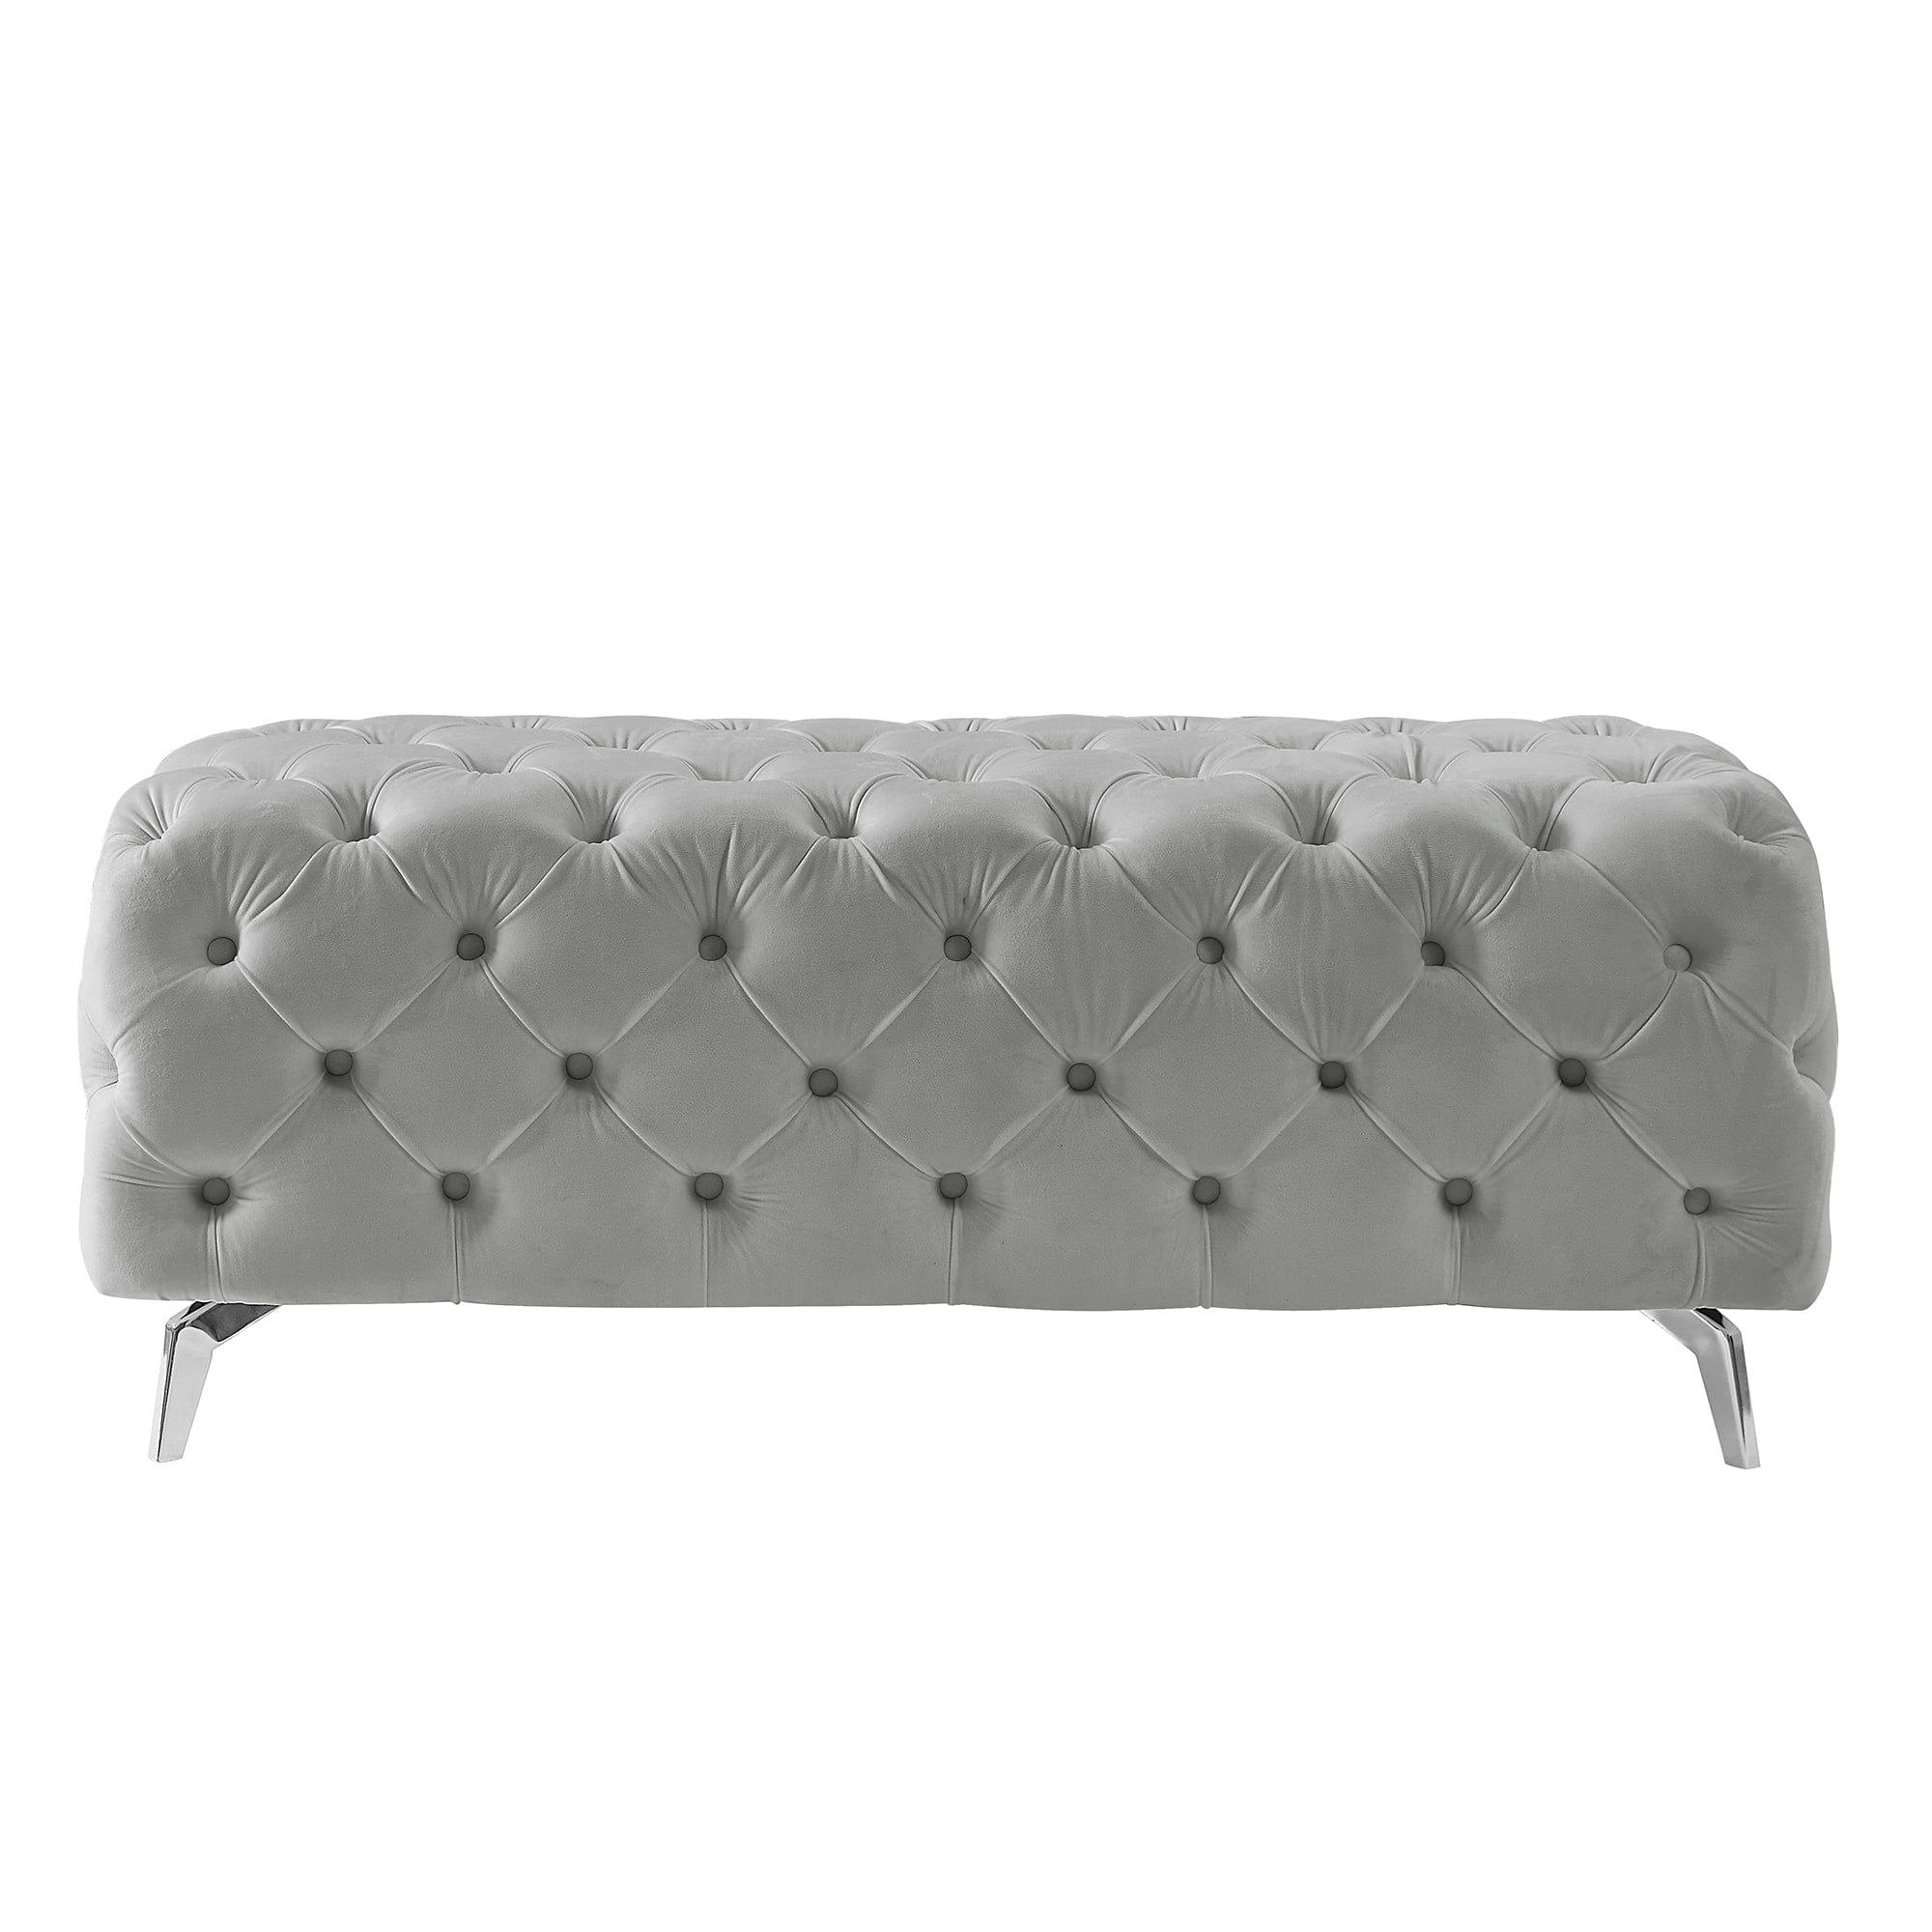 Shop Button-Tufted Ottoman Bench, Upholstered Velvet Footrest Stool Accent Bench for Entryway Living Room Bedroom. Mademoiselle Home Decor